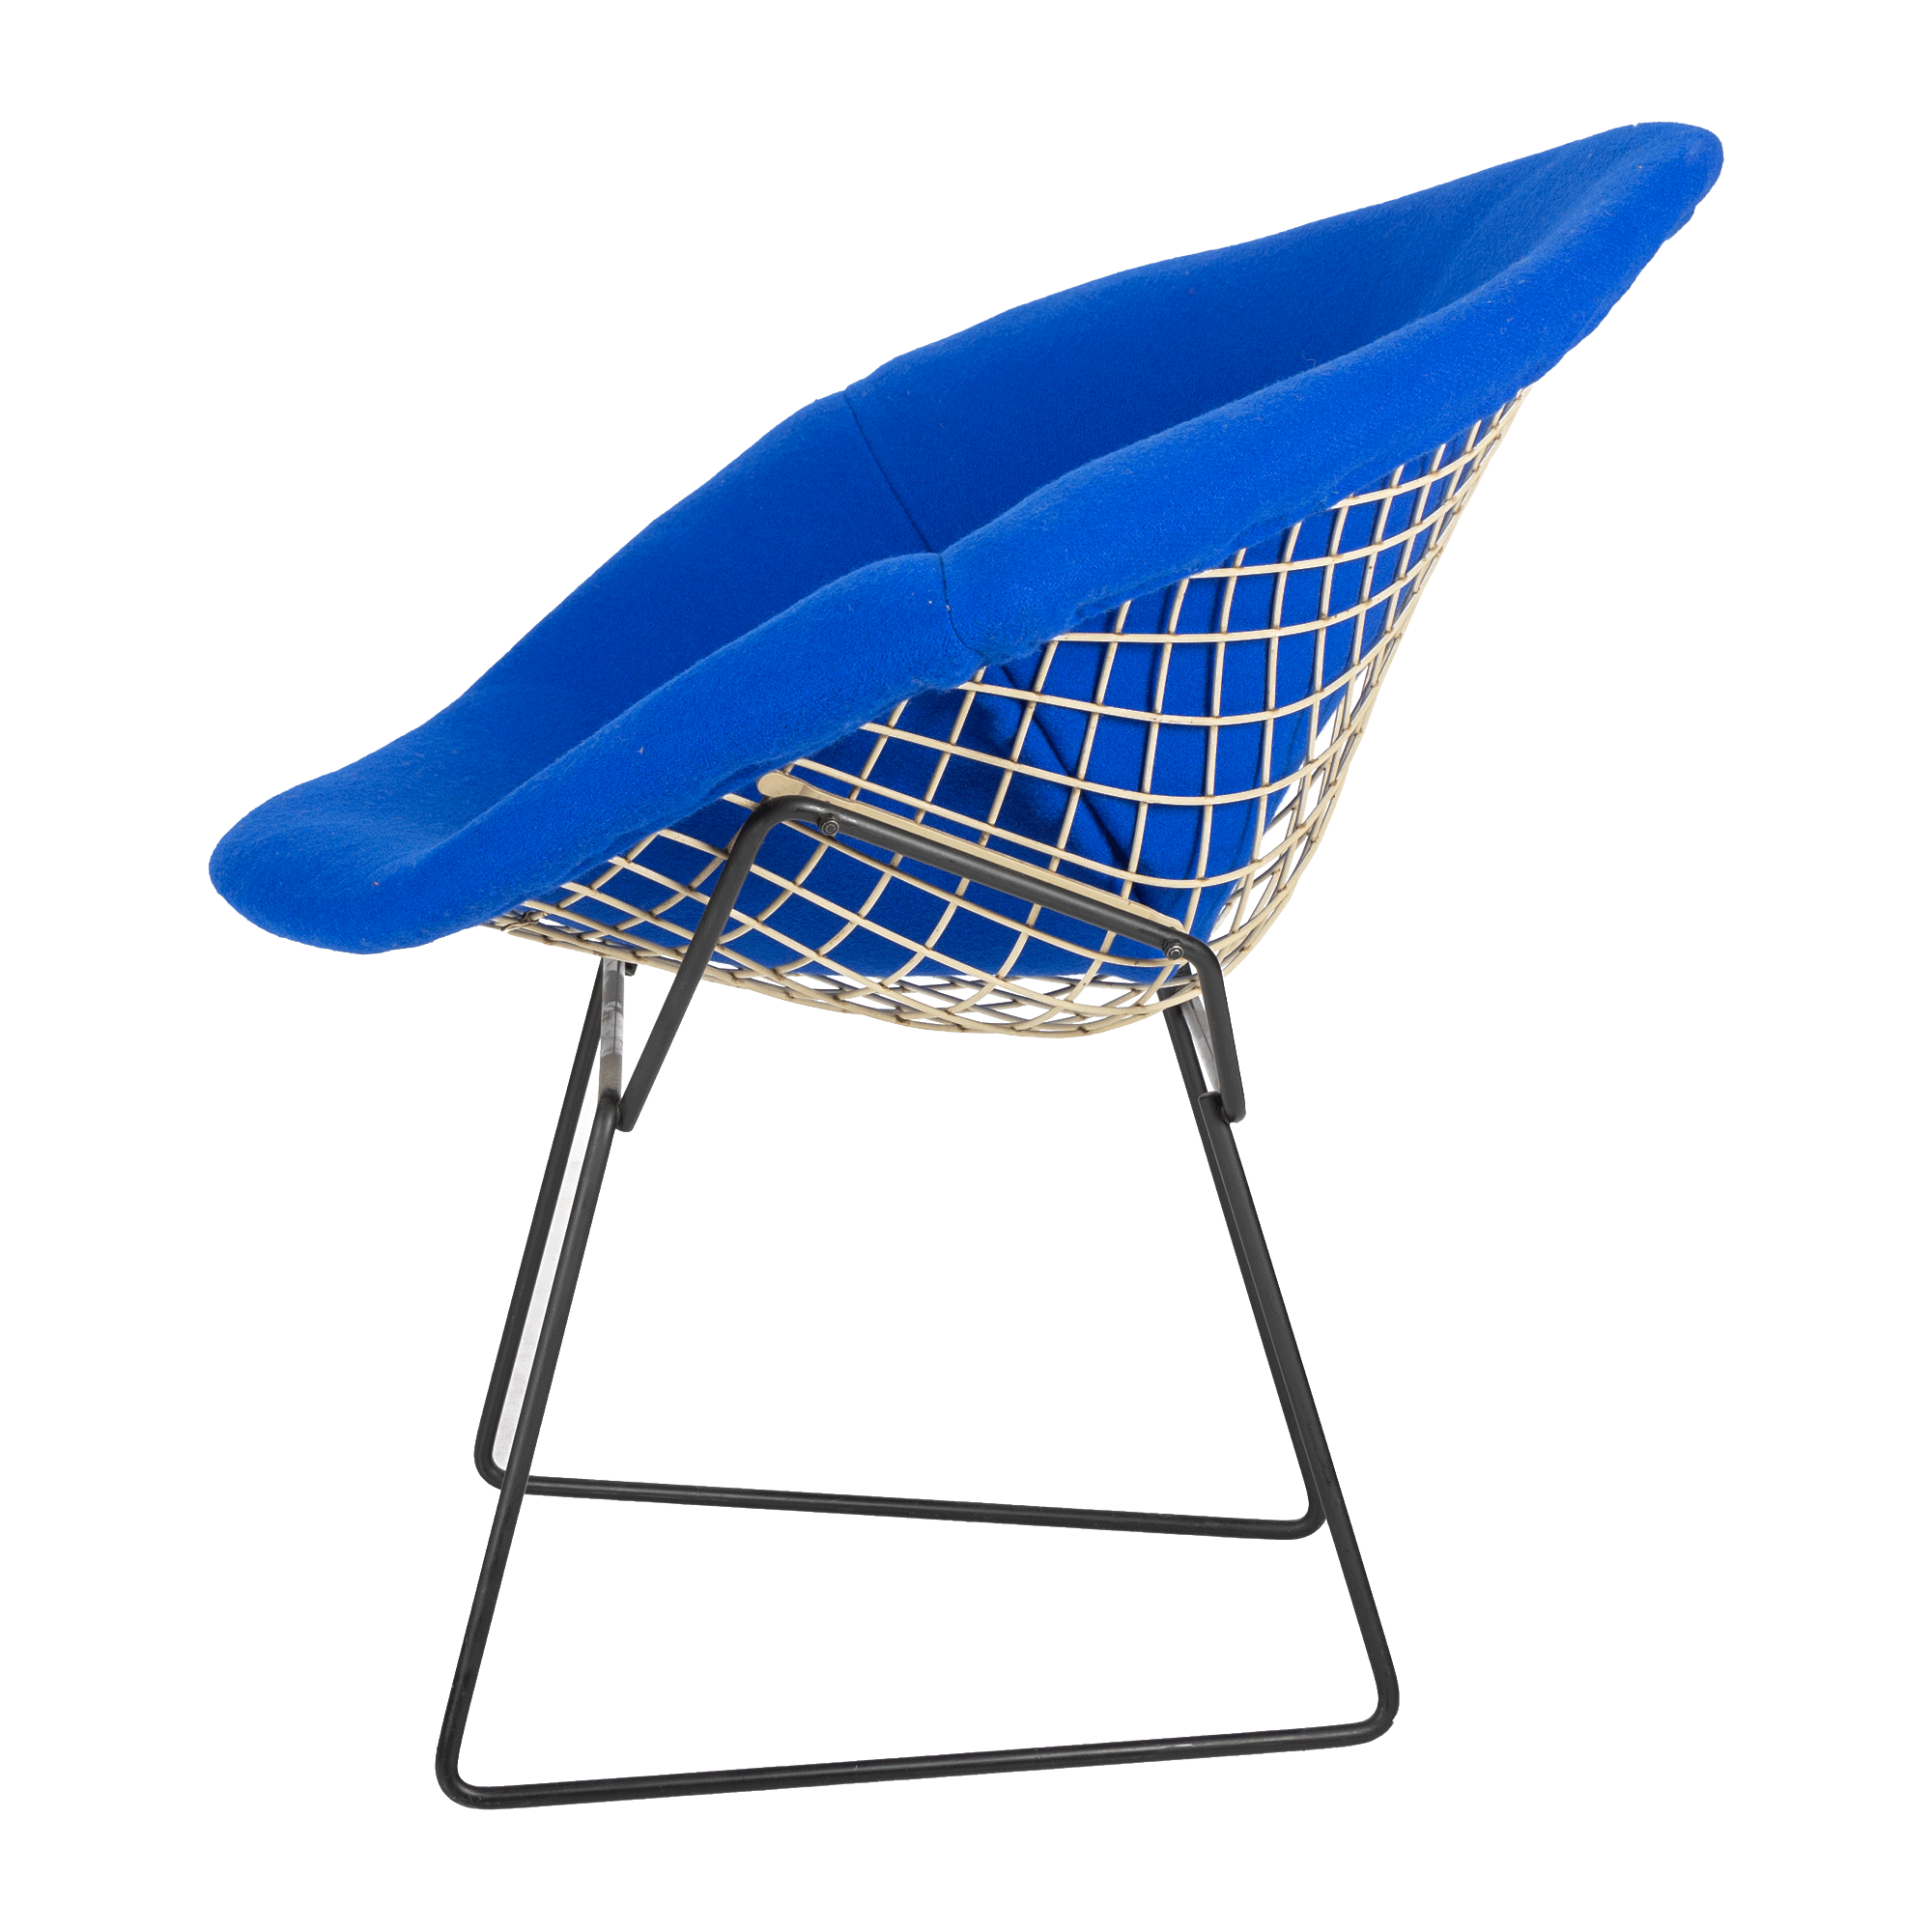 Blue and White 421 Diamond Chair by Harry Bertoia for Knoll International